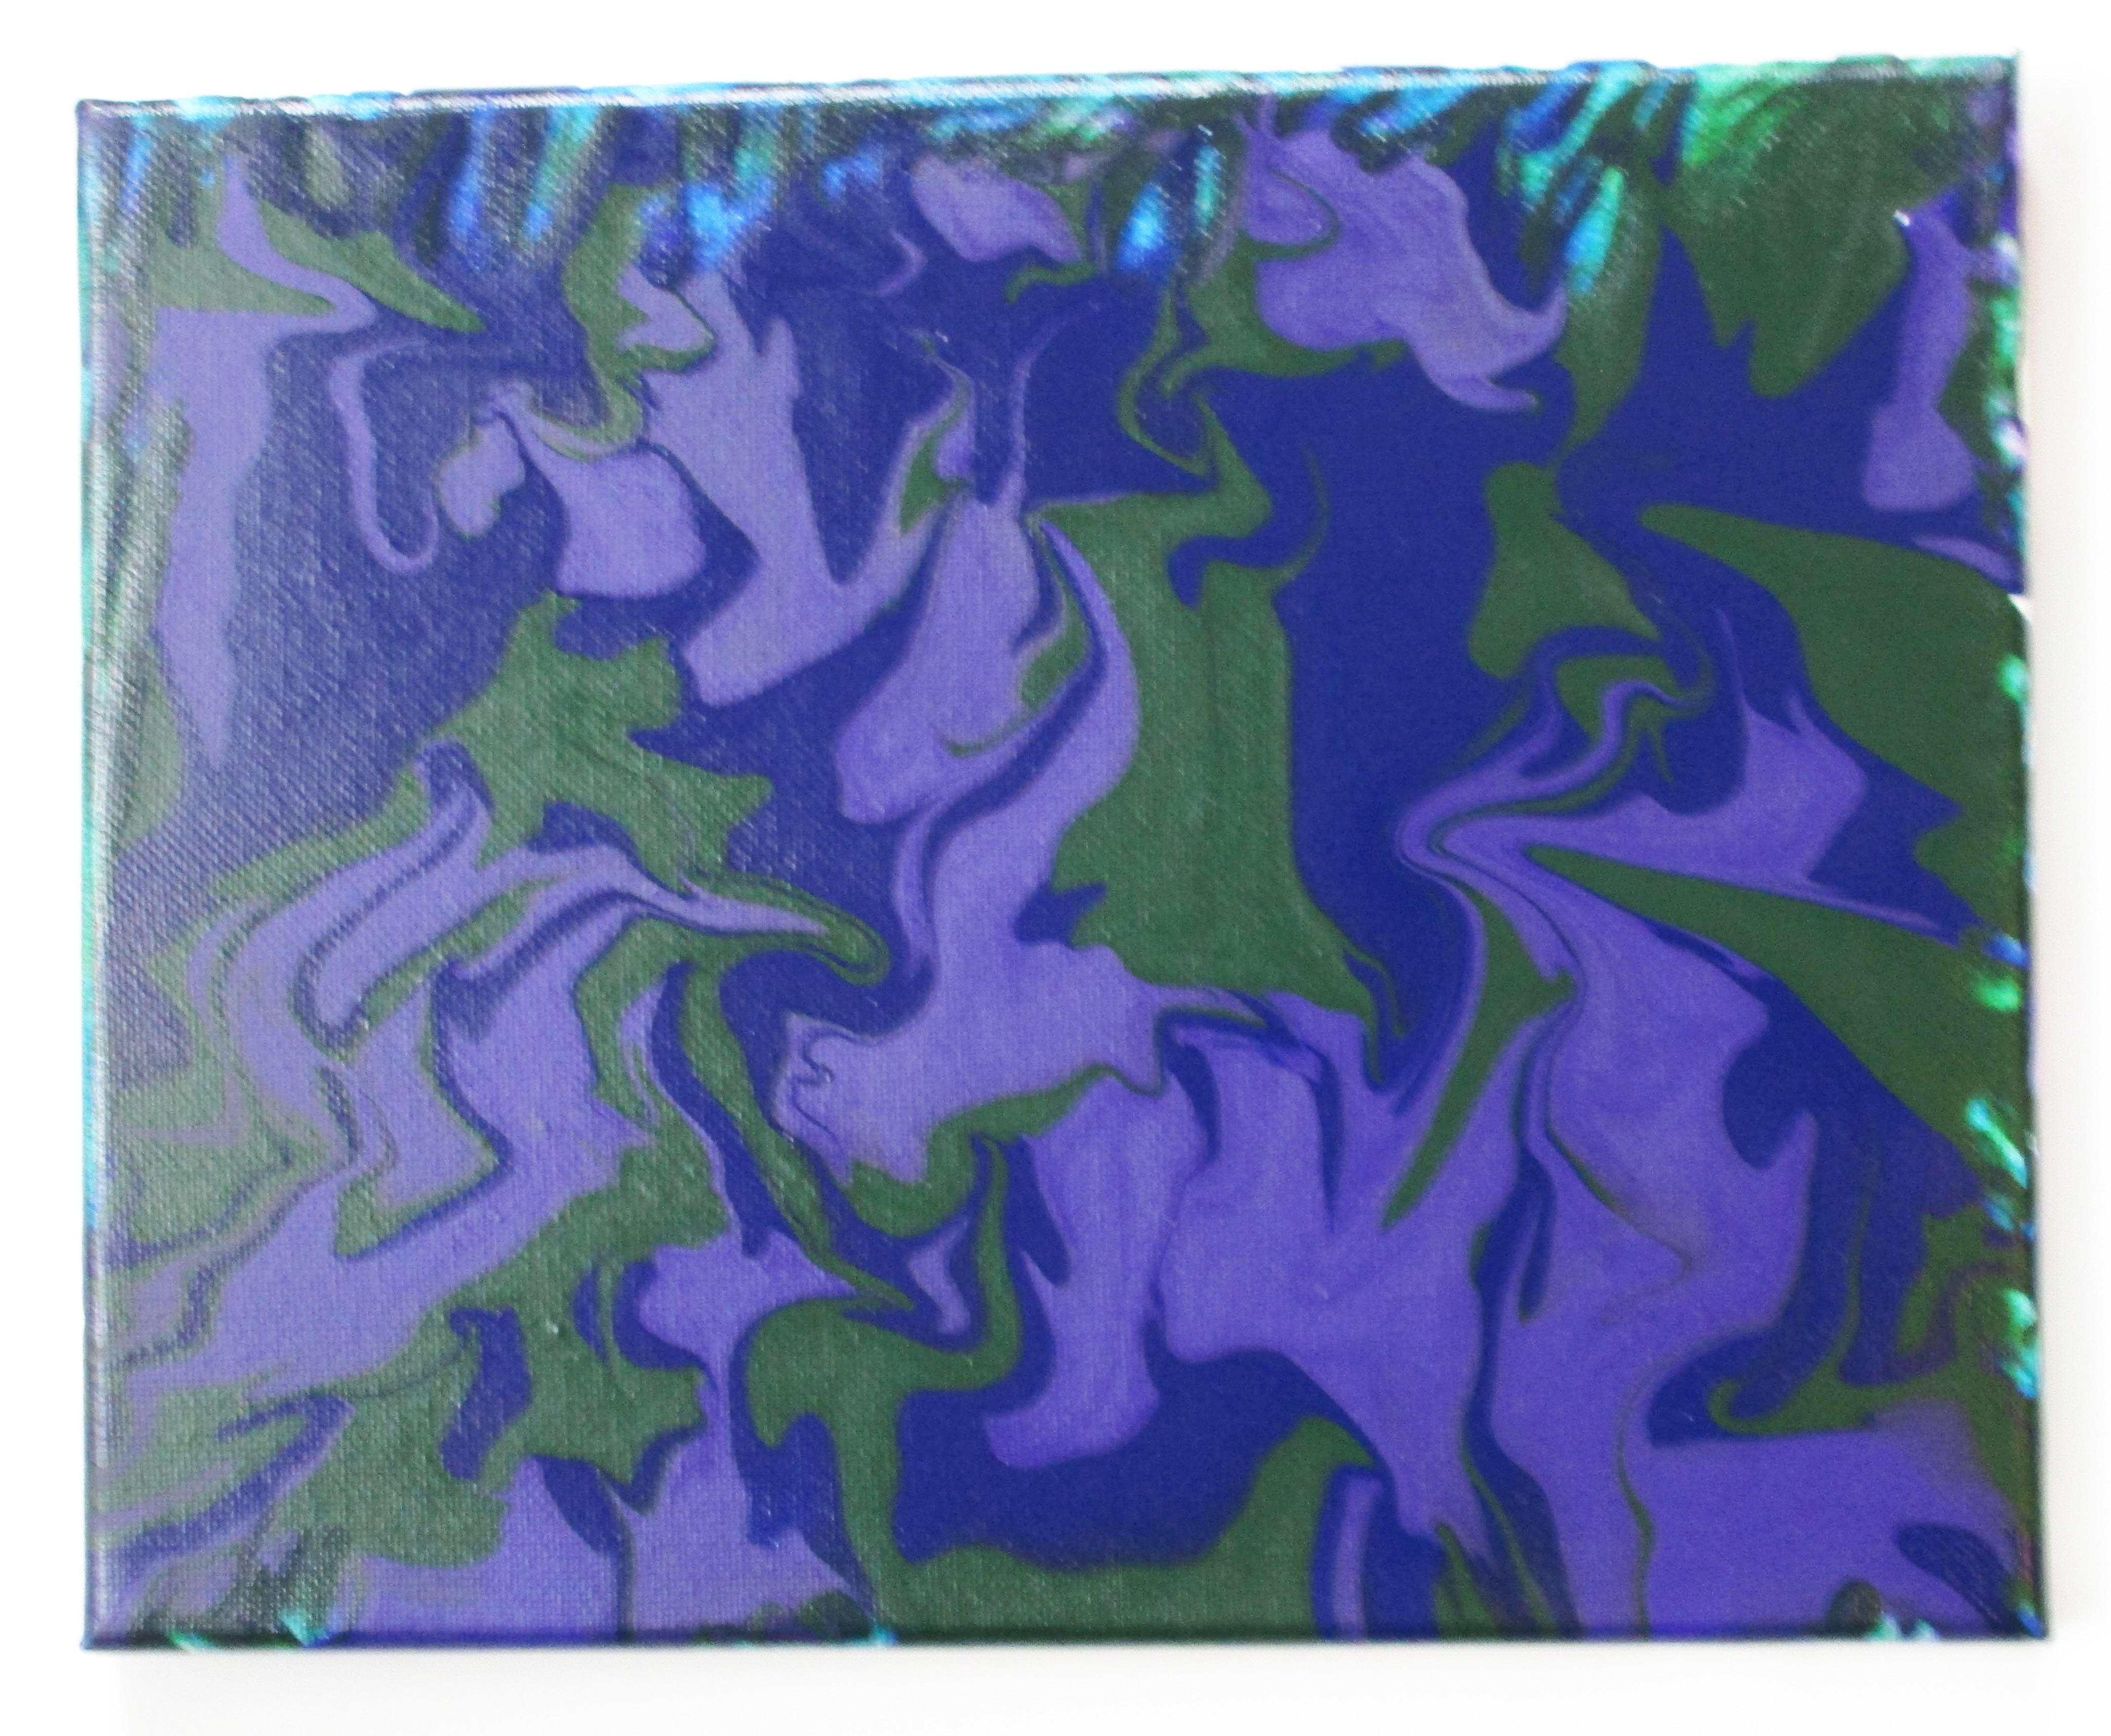 abstract painting with swirls of green, purple, and dark blue